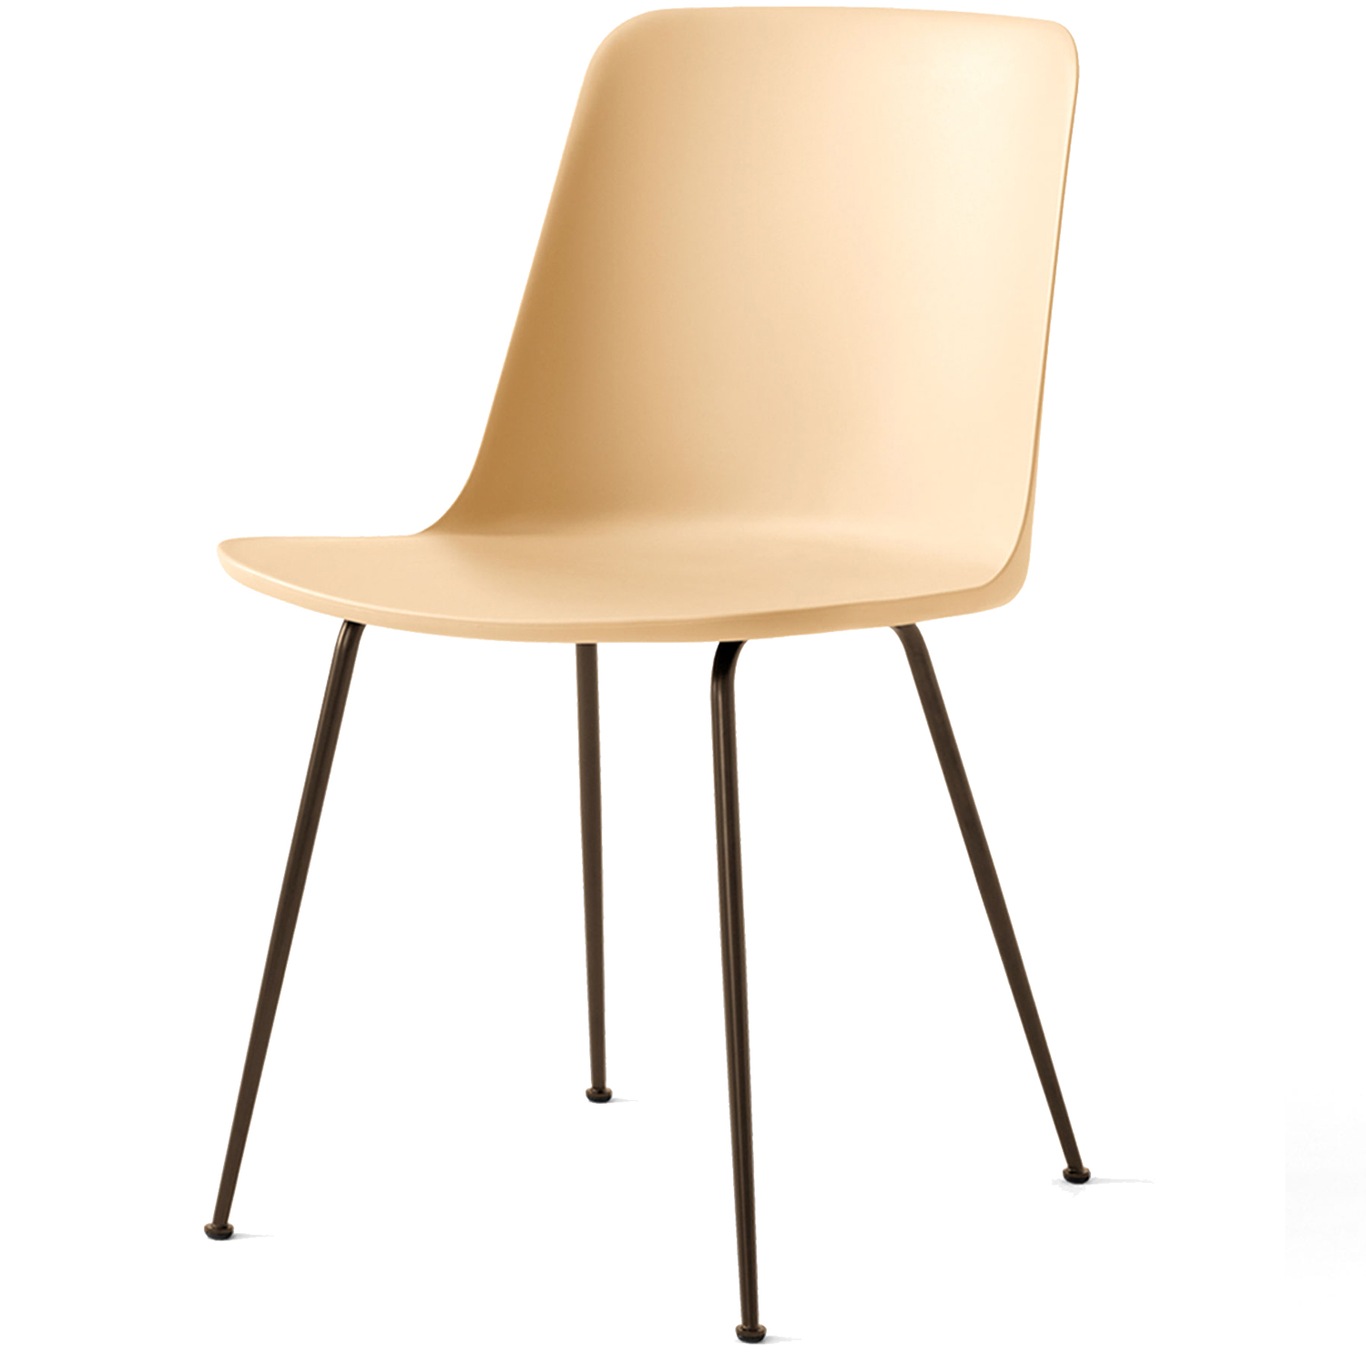 Rely Chair HW6, Bronzed / Beige